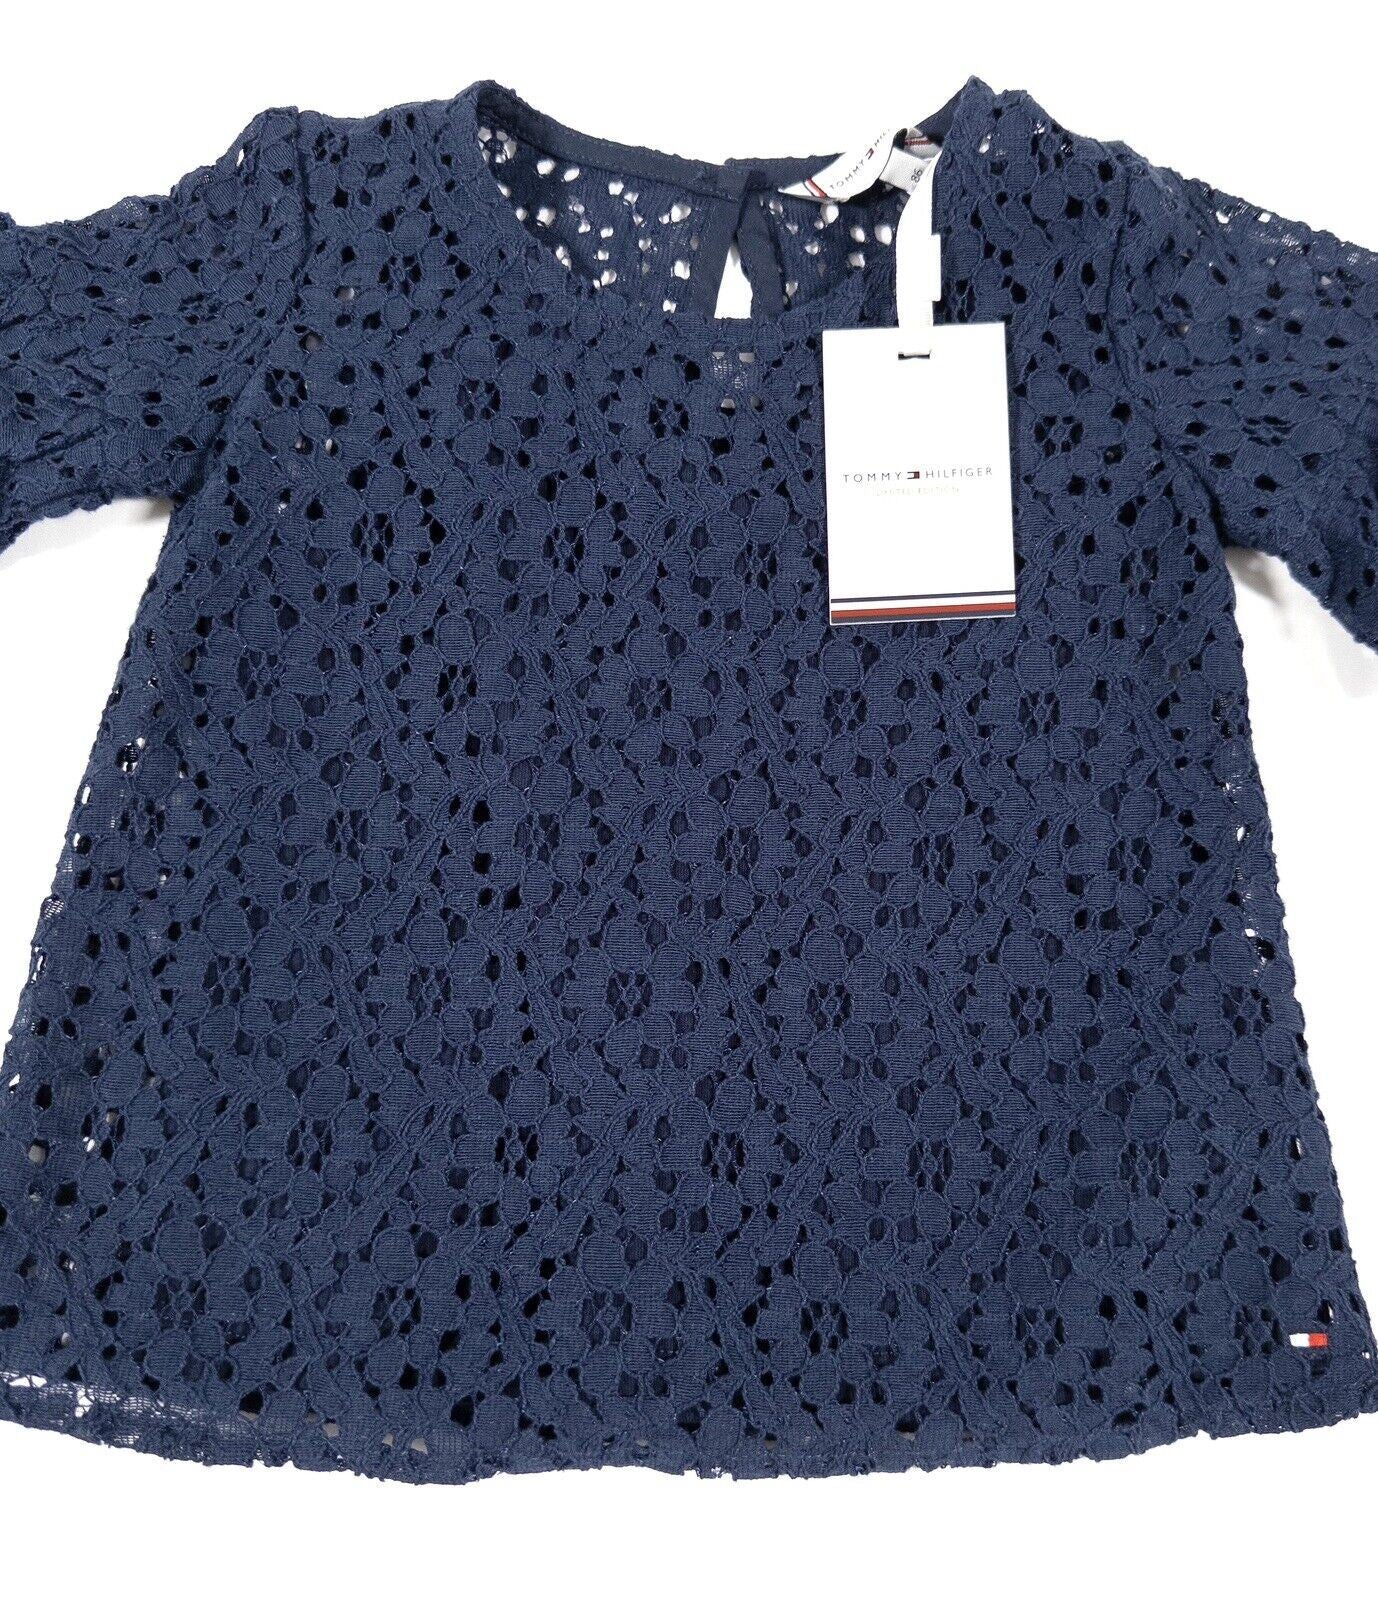 TOMMY HILFIGER Kids Baby Girls Lace Top Navy Blue Size UK 18 Months